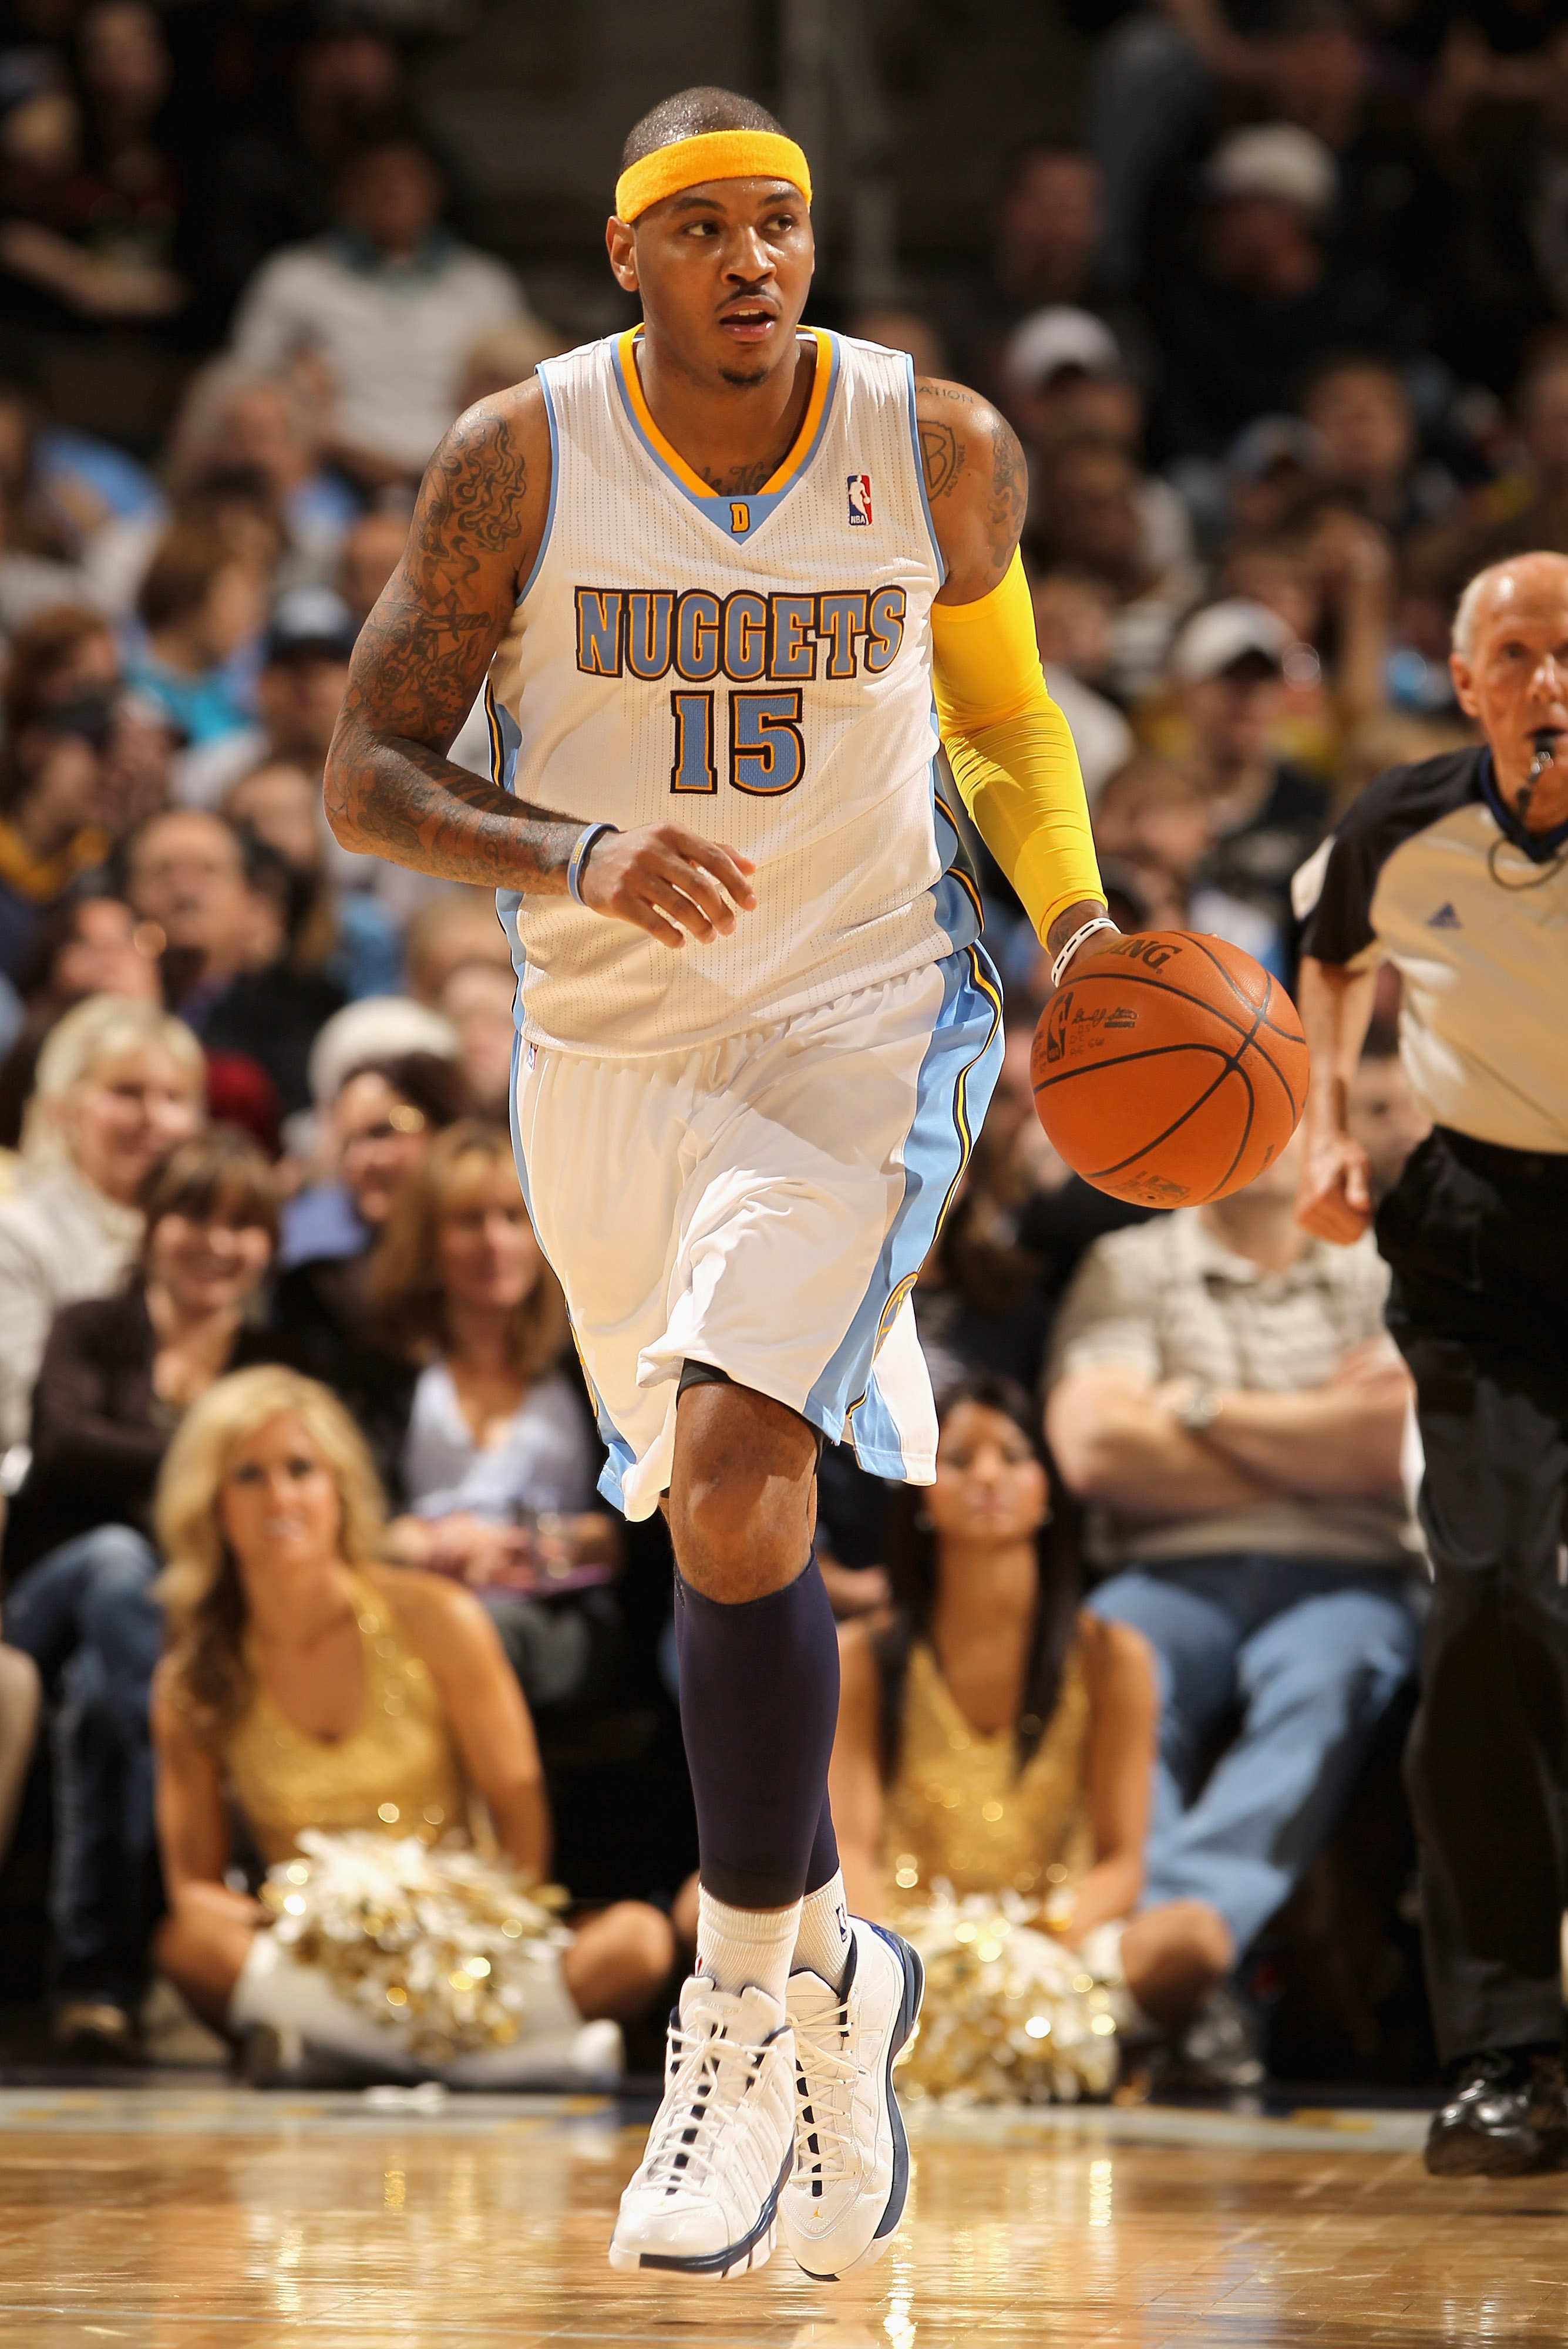 DENVER, CO - JANUARY 13:  Carmelo Anthony #15 of the Denver Nuggets dribbles the ball upcourt against the Miami Heat at the Pepsi Center on January 13, 2011 in Denver, Colorado. The Nuggets defeated the Heat 130-102. NOTE TO USER: User expressly acknowled